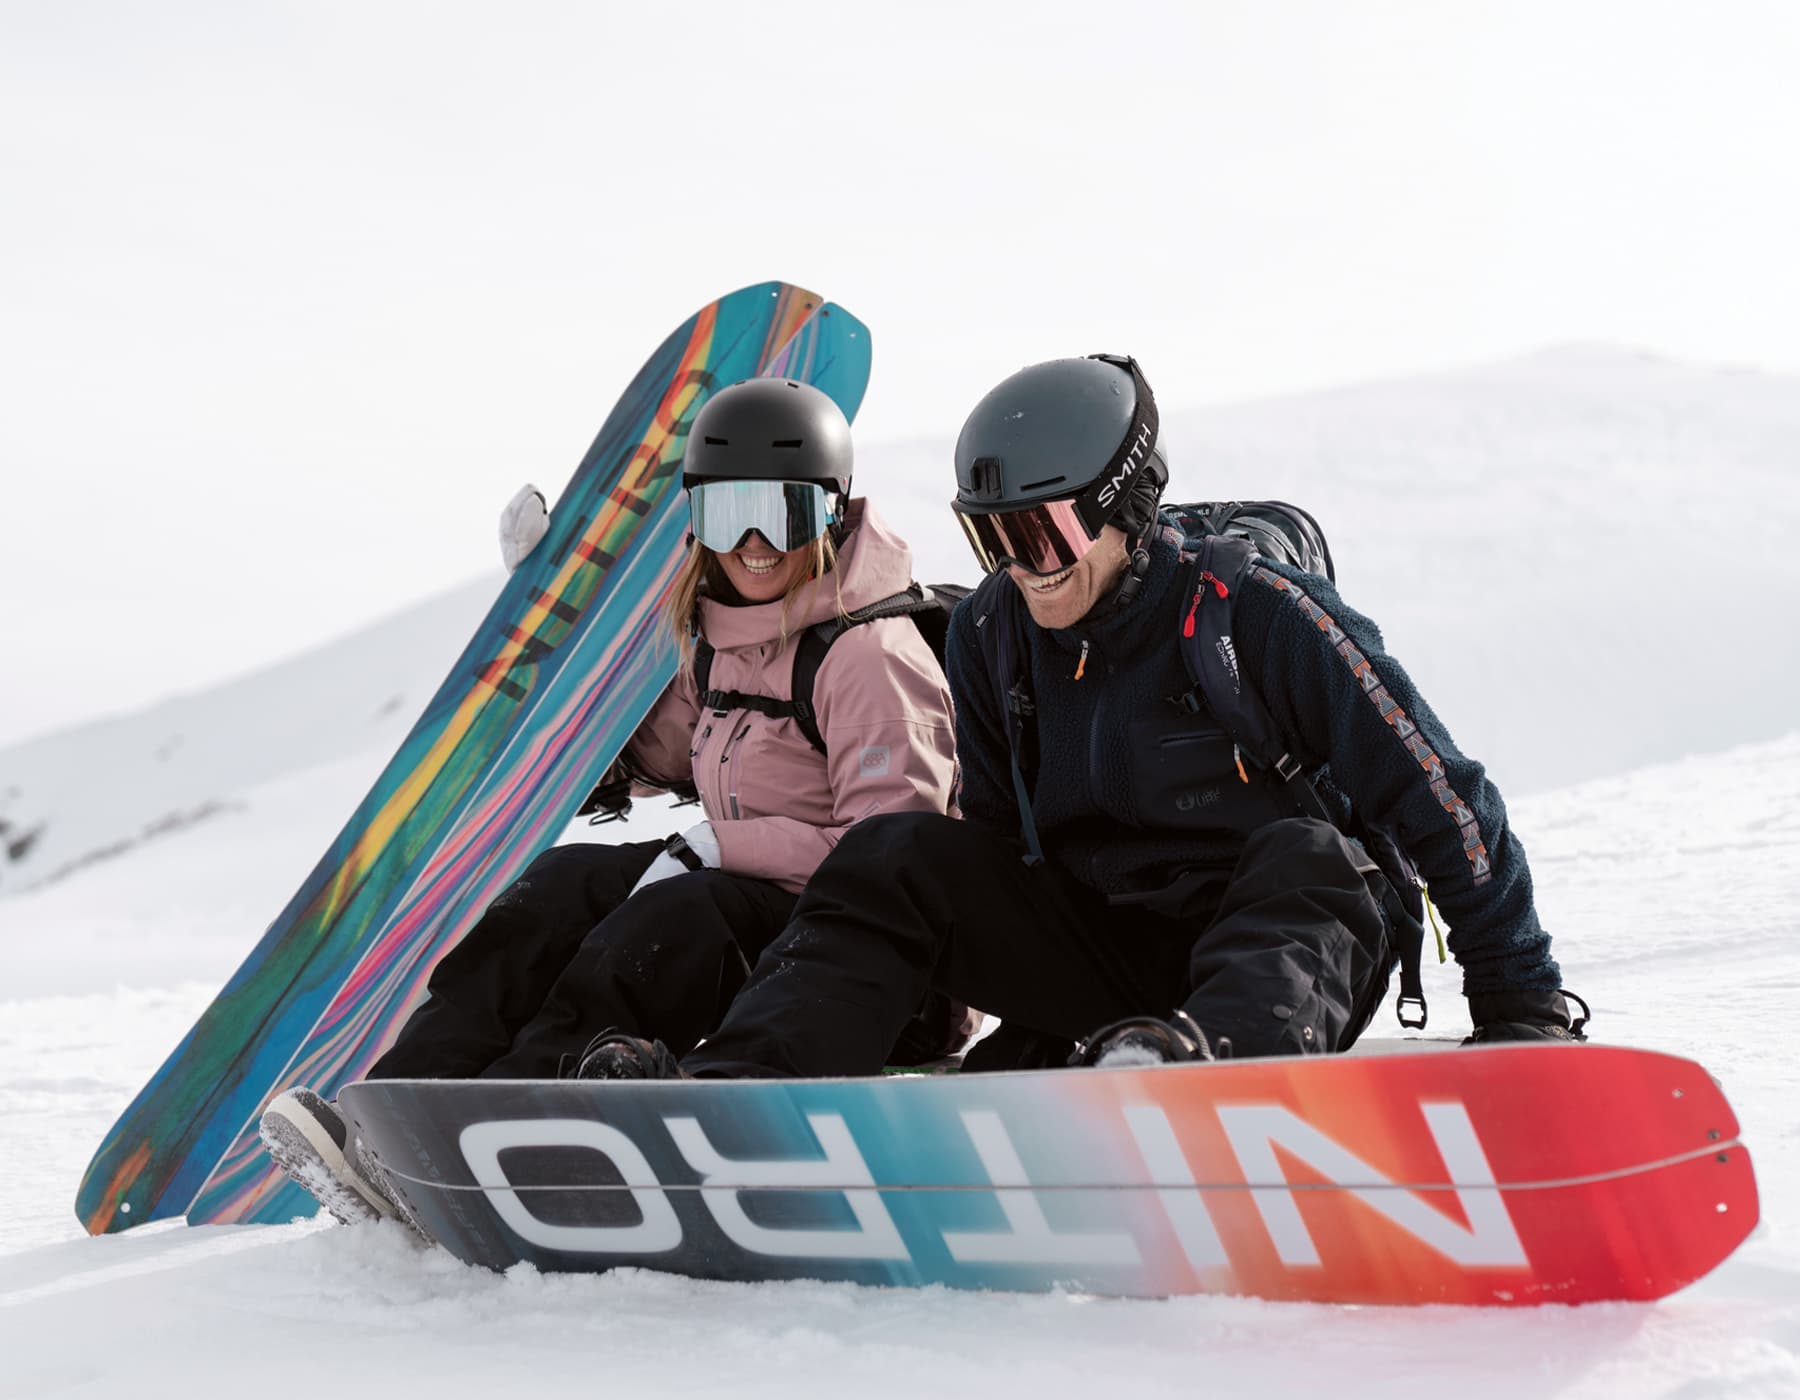 Female snowboarder wearing a pink jacket, helmet and goggles sitting in the snow on the side of a run, smiling and holding a Nitro snowboard. Beside her is a male snowboarder wearing a black jacket, helmet and goggles with his feet strapped into a Nitro snowboard, also sitting and smiling. 